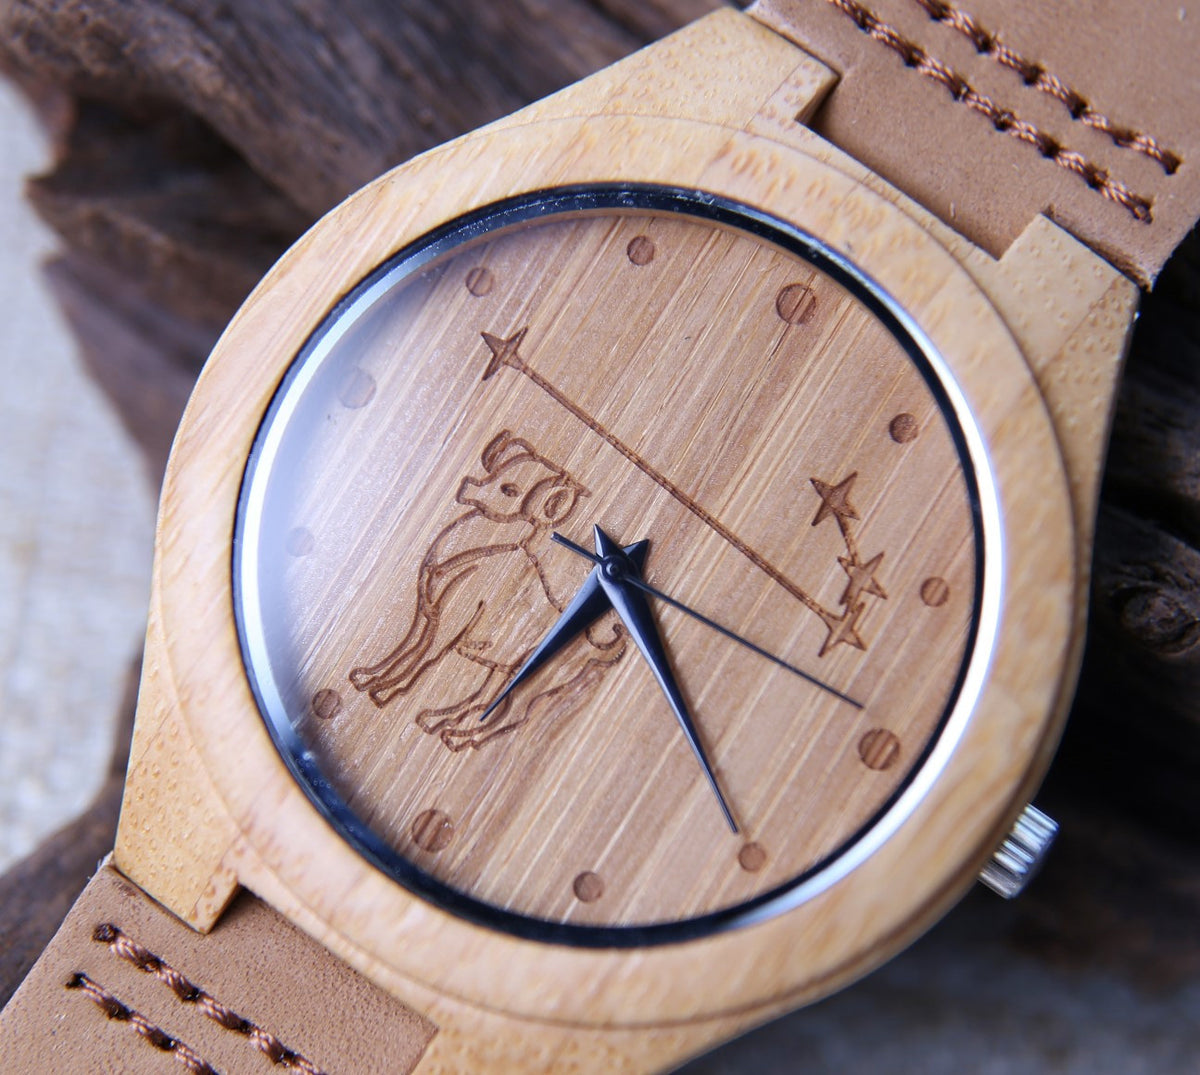 Made of 100% Natural Wood, High quality clock core imported from Japan. Best man gifts, Chirstmas Gift, Groom gift, groomsmen gifts, house warming gift